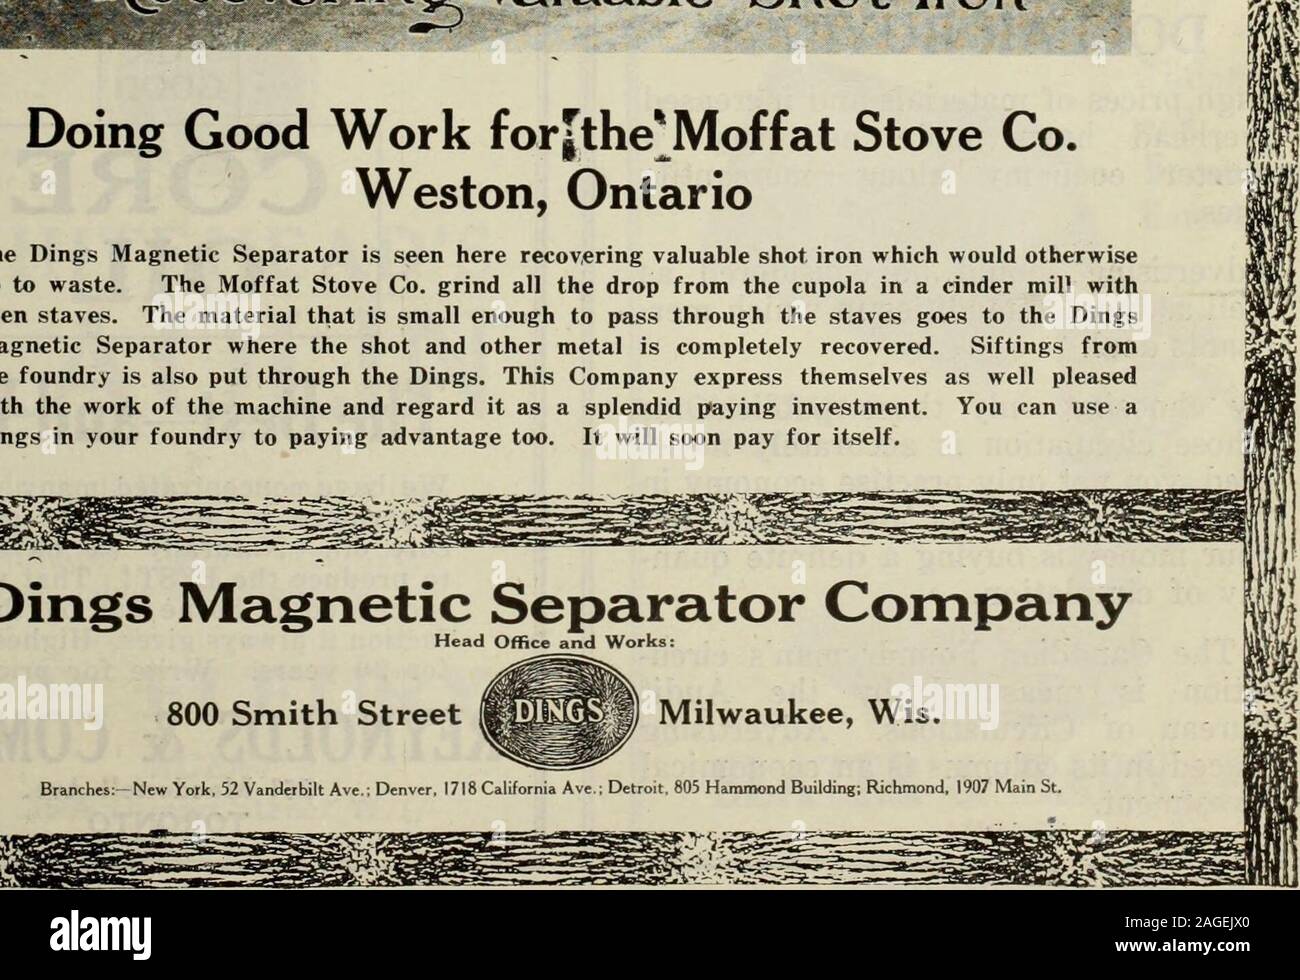 . Canadian foundryman (1921). Doing Good Work for[the*Moffat Stove Co. Weston, Ontario The Dings Magnetic Separator is seen here recovering valuable shot iron which would otherwisego to waste. The Moffat Stove Co. grind all the drop from the cupola in a cinder mill withopen staves. The material that is small enough to pass through the staves goes to the DingsMagnetic Separator where the shot and other metal is completely recovered. Siftings fromthe foundry is also put through the Dings. This Company express themselves as well pleasedwith the work of the machine and regard it as a splendid payi Stock Photo